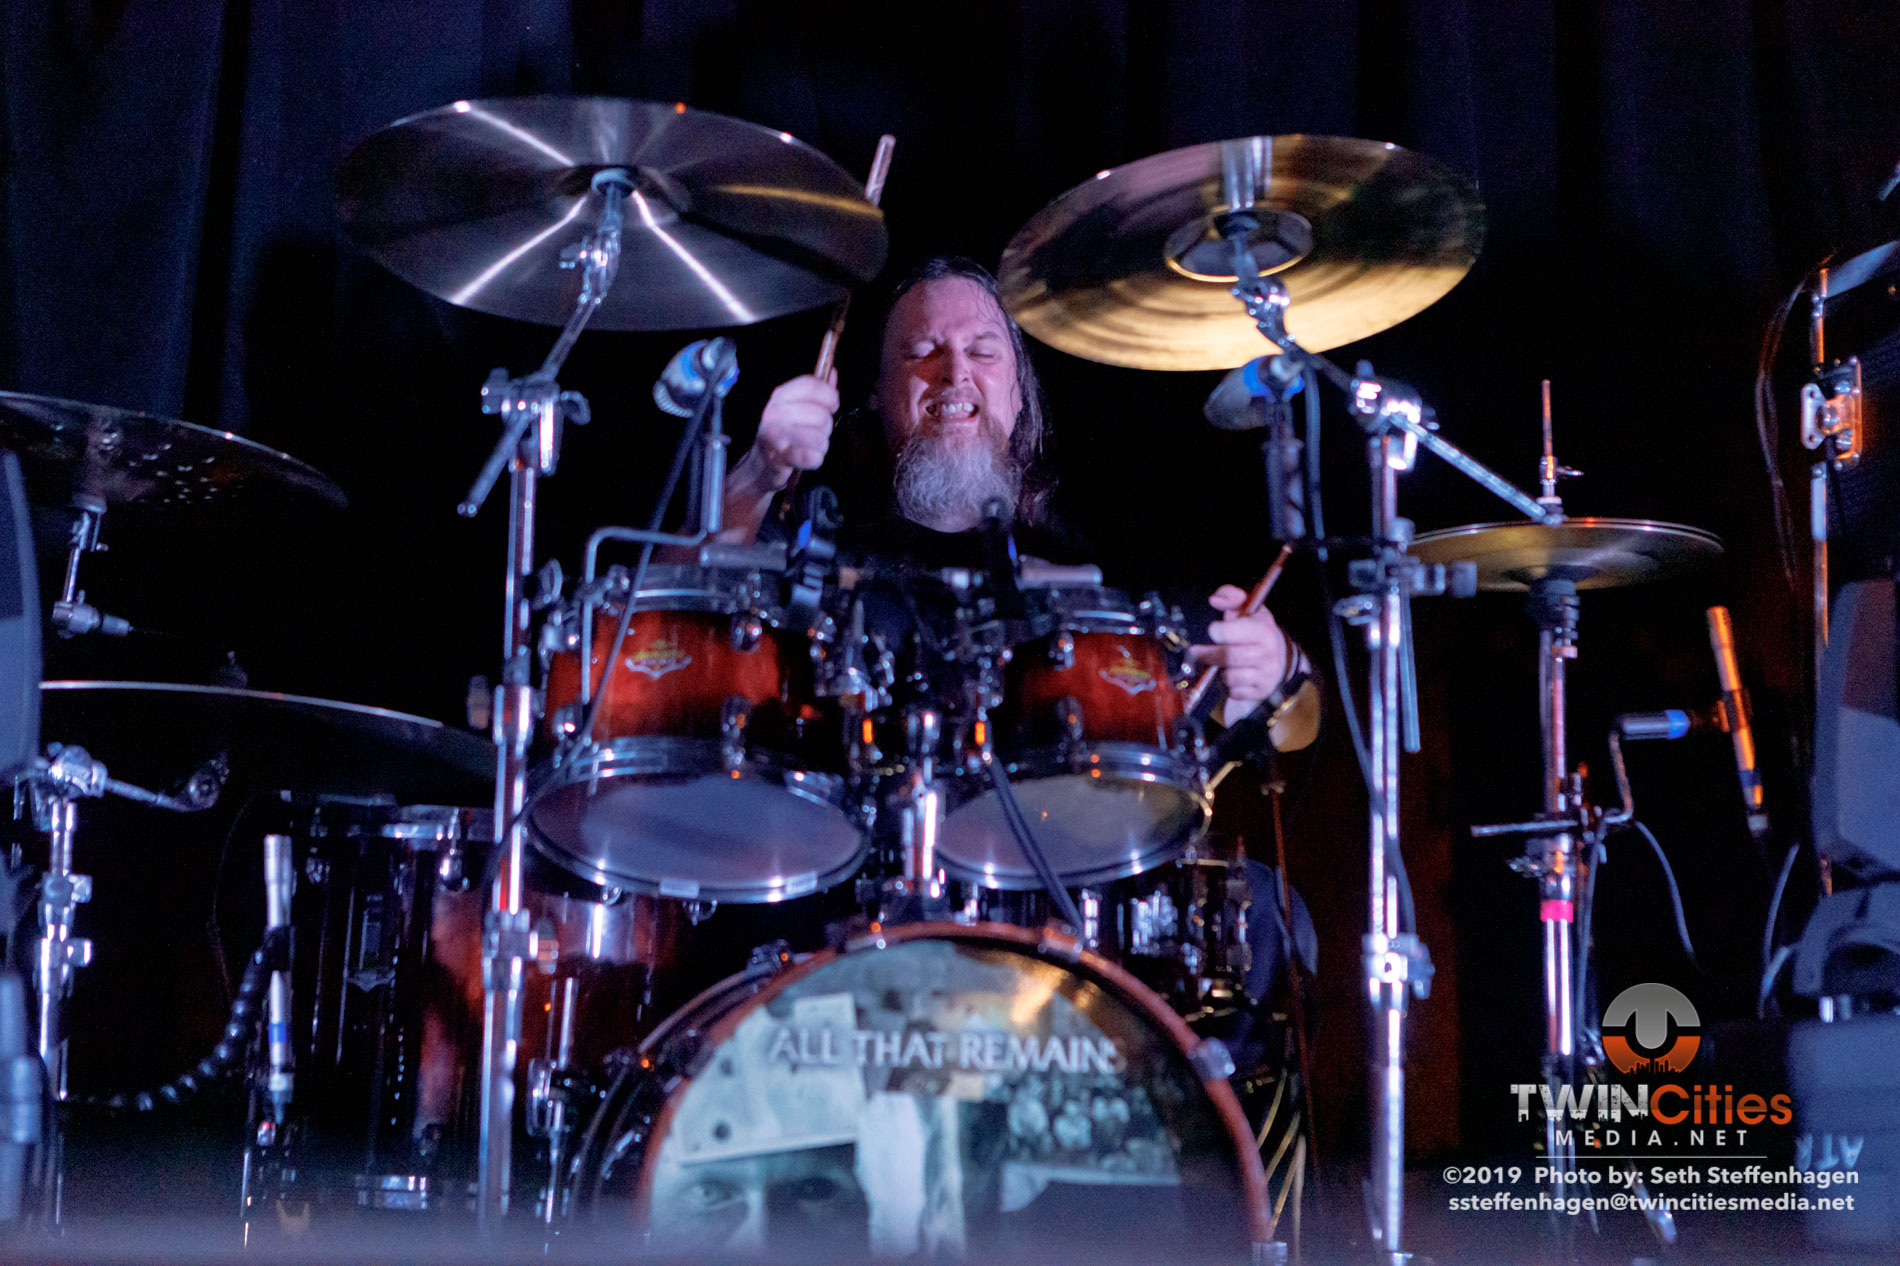 March 12, 2019 - Minneapolis, Minnesota, United States - All That Remains live in concert atThe Cabooze along with Atilla, Escape The Fate and Sleep Signals as the openers.

(Photo by Seth Steffenhagen/Steffenhagen Photography)